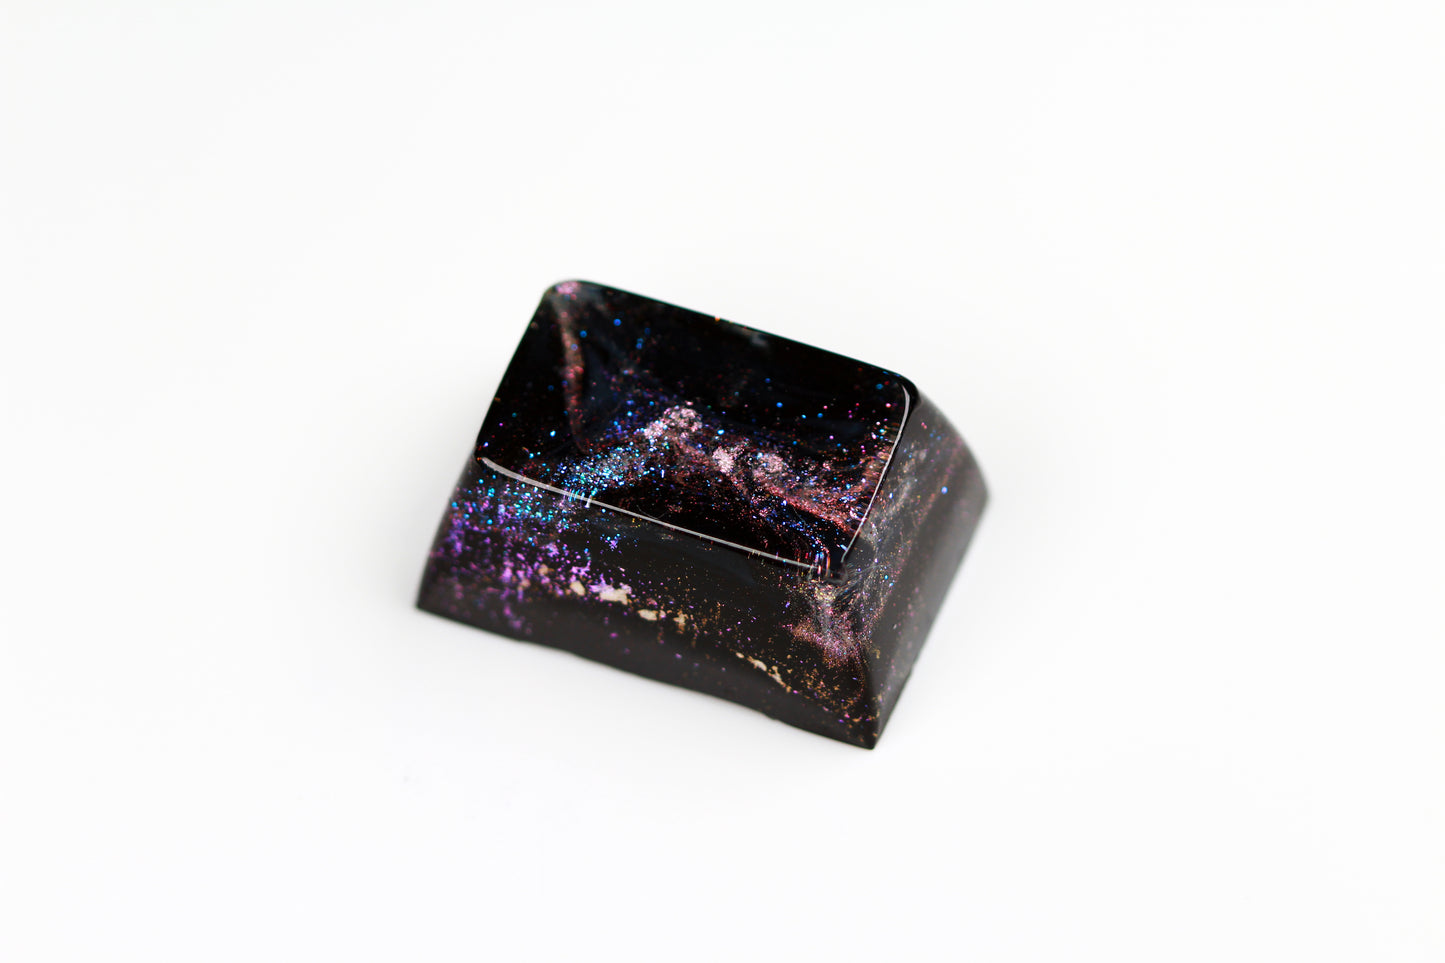 Gimpy SA Row 2, 1.5u - Deep Field Particle Stream 3 - PrimeCaps Keycap - Blank and Sculpted Artisan Keycaps for cherry MX mechanical keyboards 